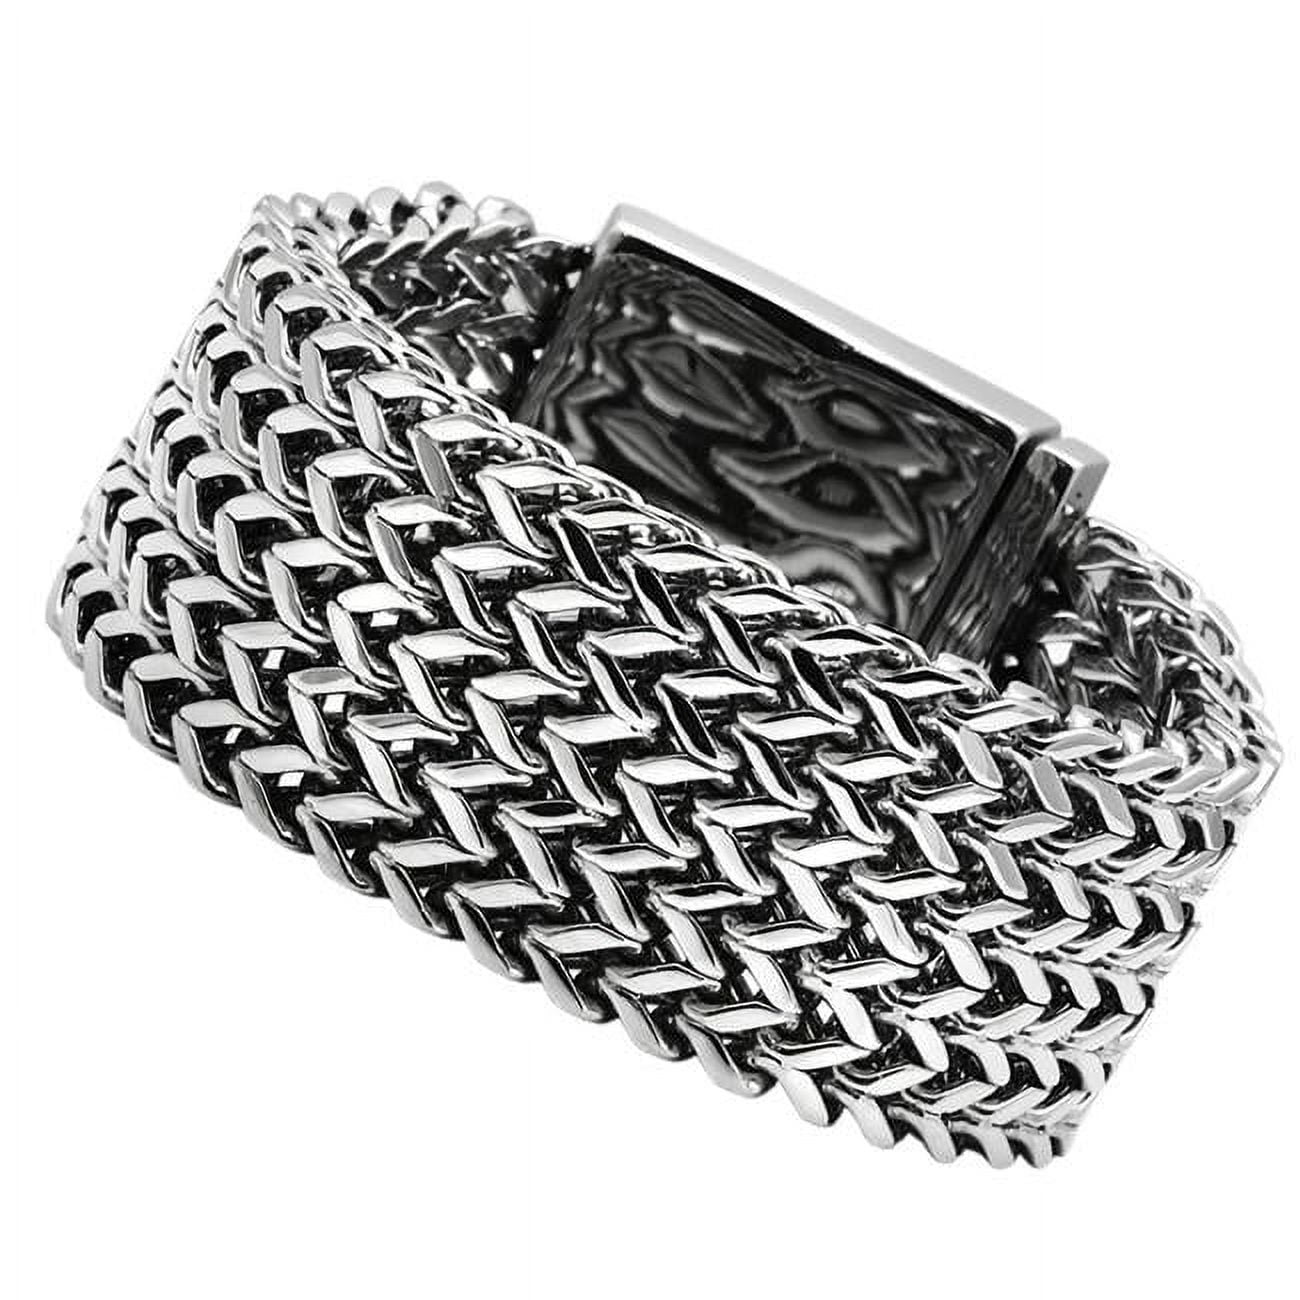 Picture of Alamode TK451-7.75 7.75 in. High Polished No Plating Stainless Steel Bracelet with No Stone